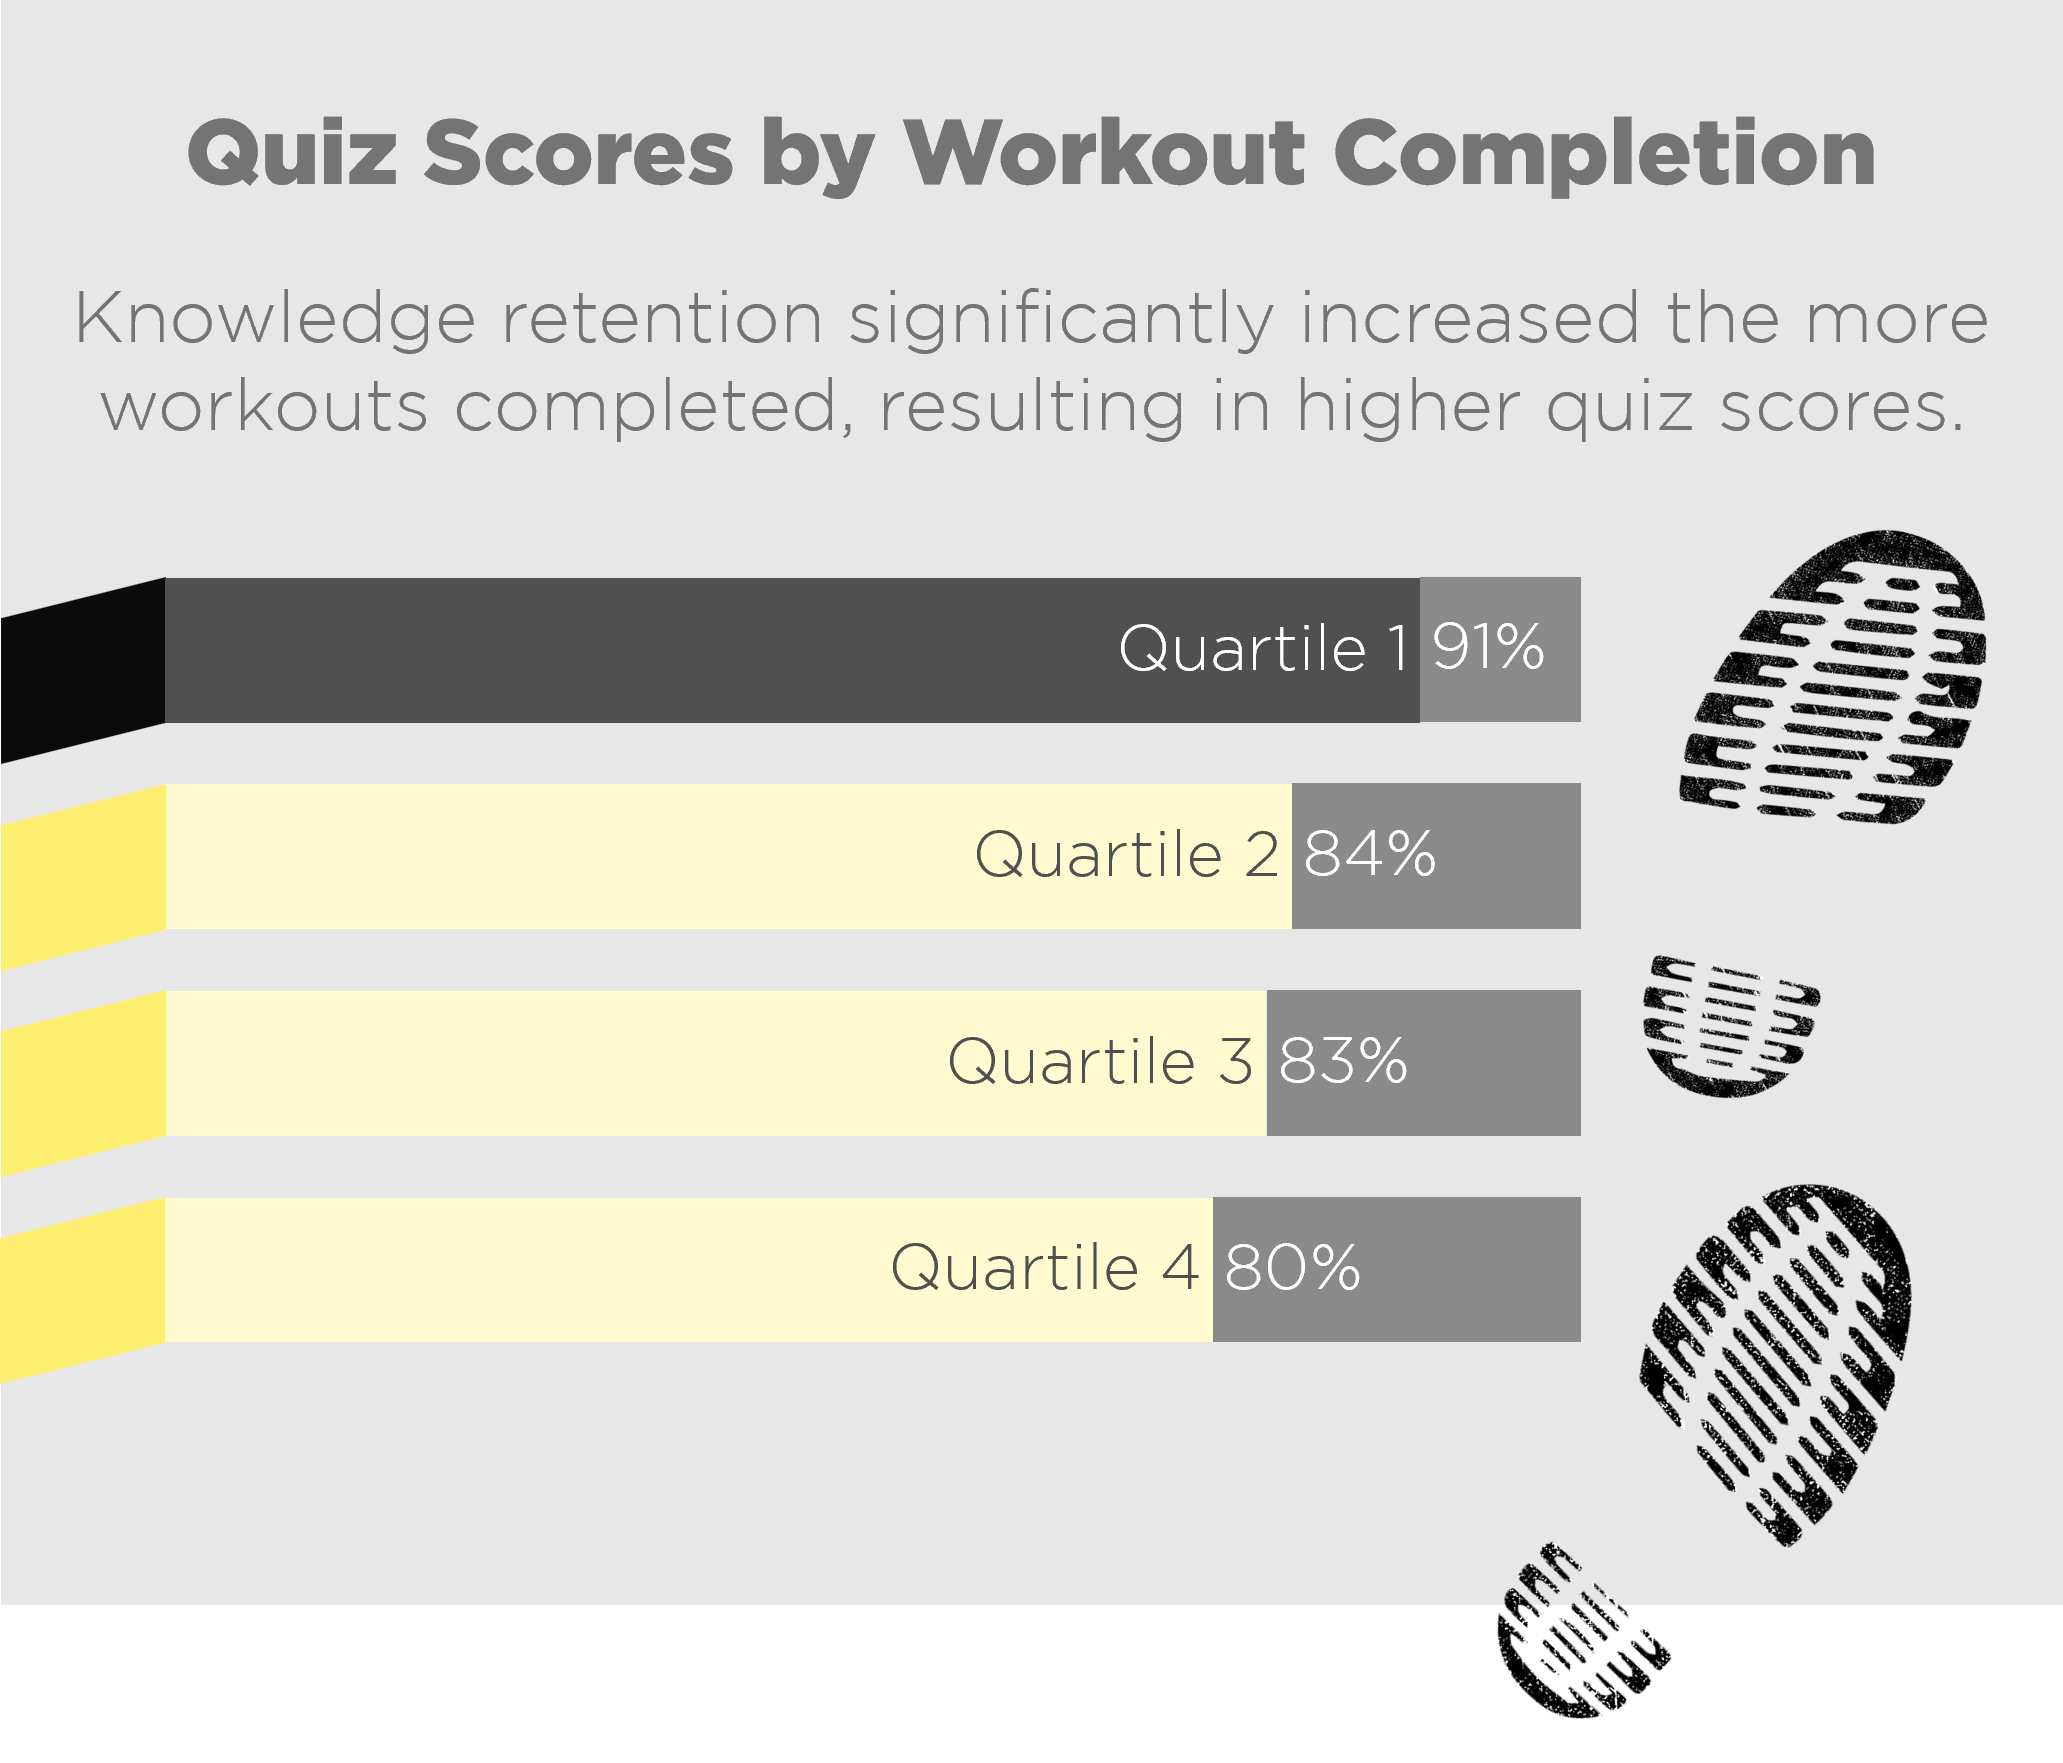 Chart for "Quiz Scores by Workout Completion" "Knowledge retention significantly increased the more workouts completed, resulting in higher quiz score." receiving 91% in Quartile 1